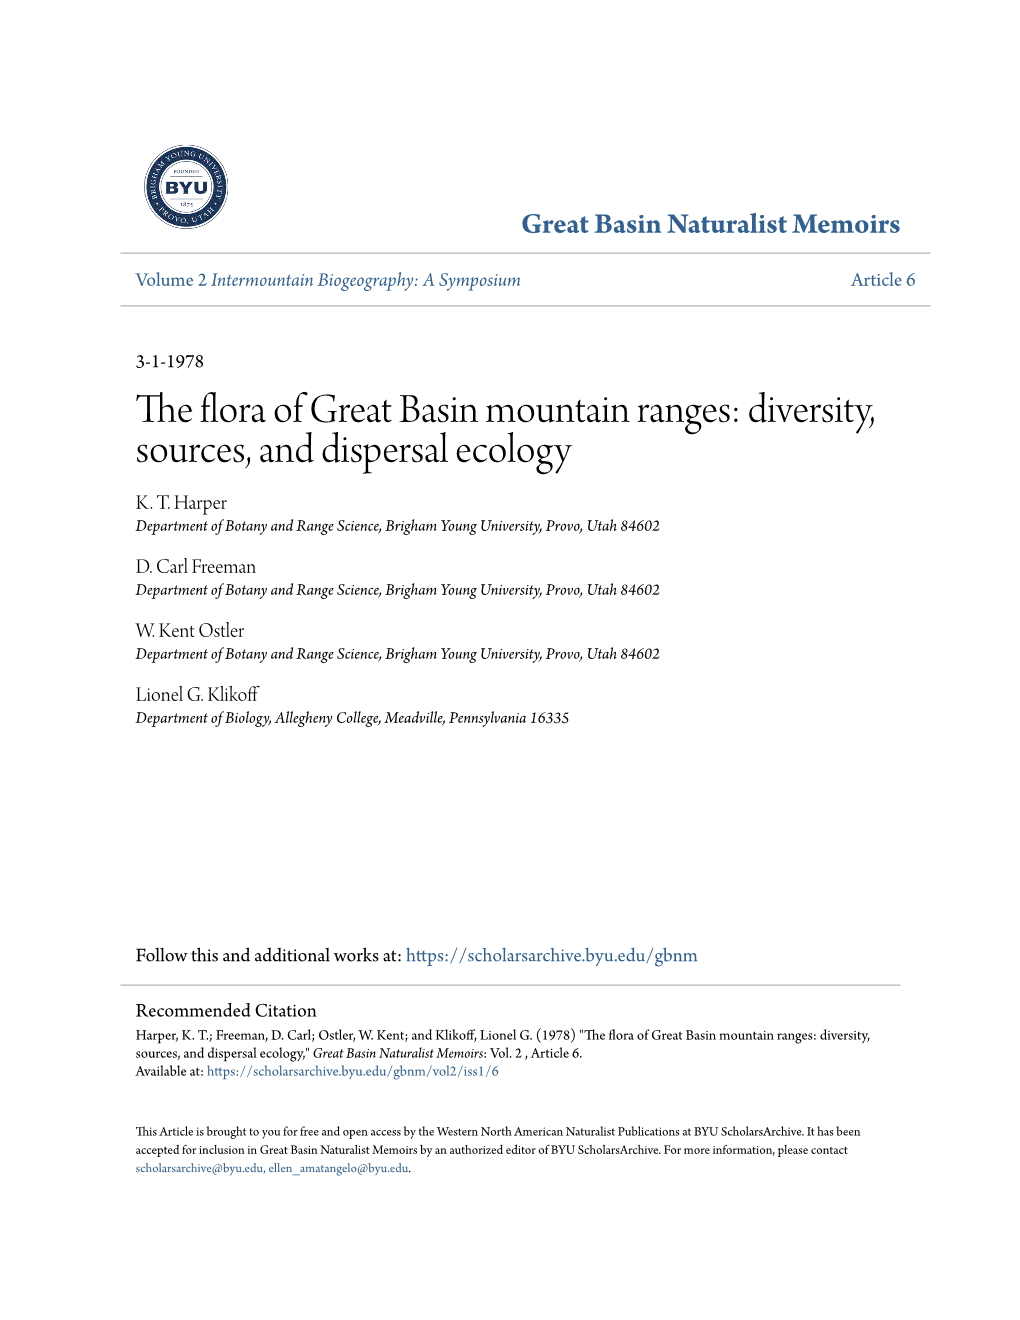 The Flora of Great Basin Mountain Ranges: Diversity, Sources, and Dispersal Ecology K